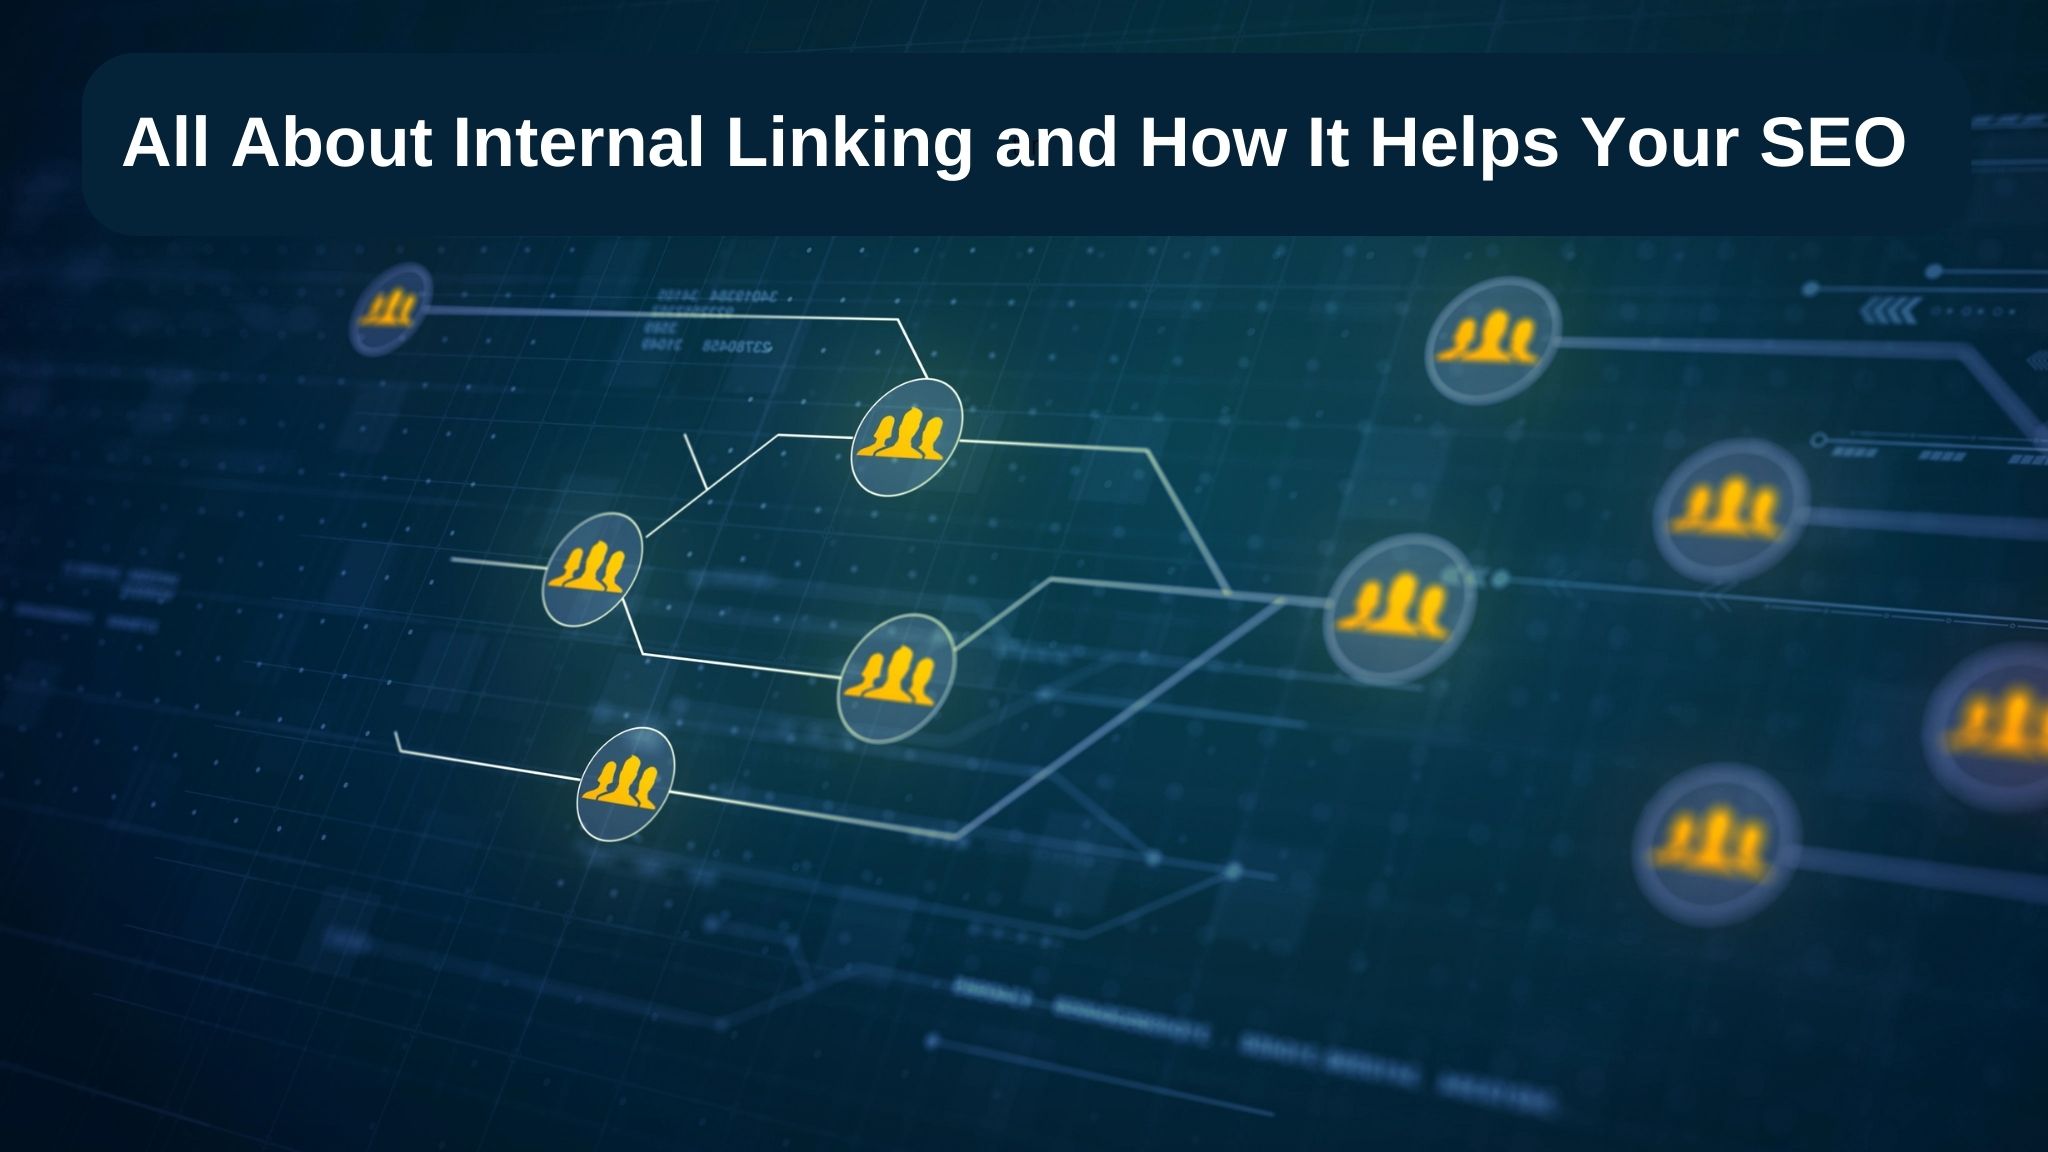 All About Internal Linking and How It Helps Your SEO